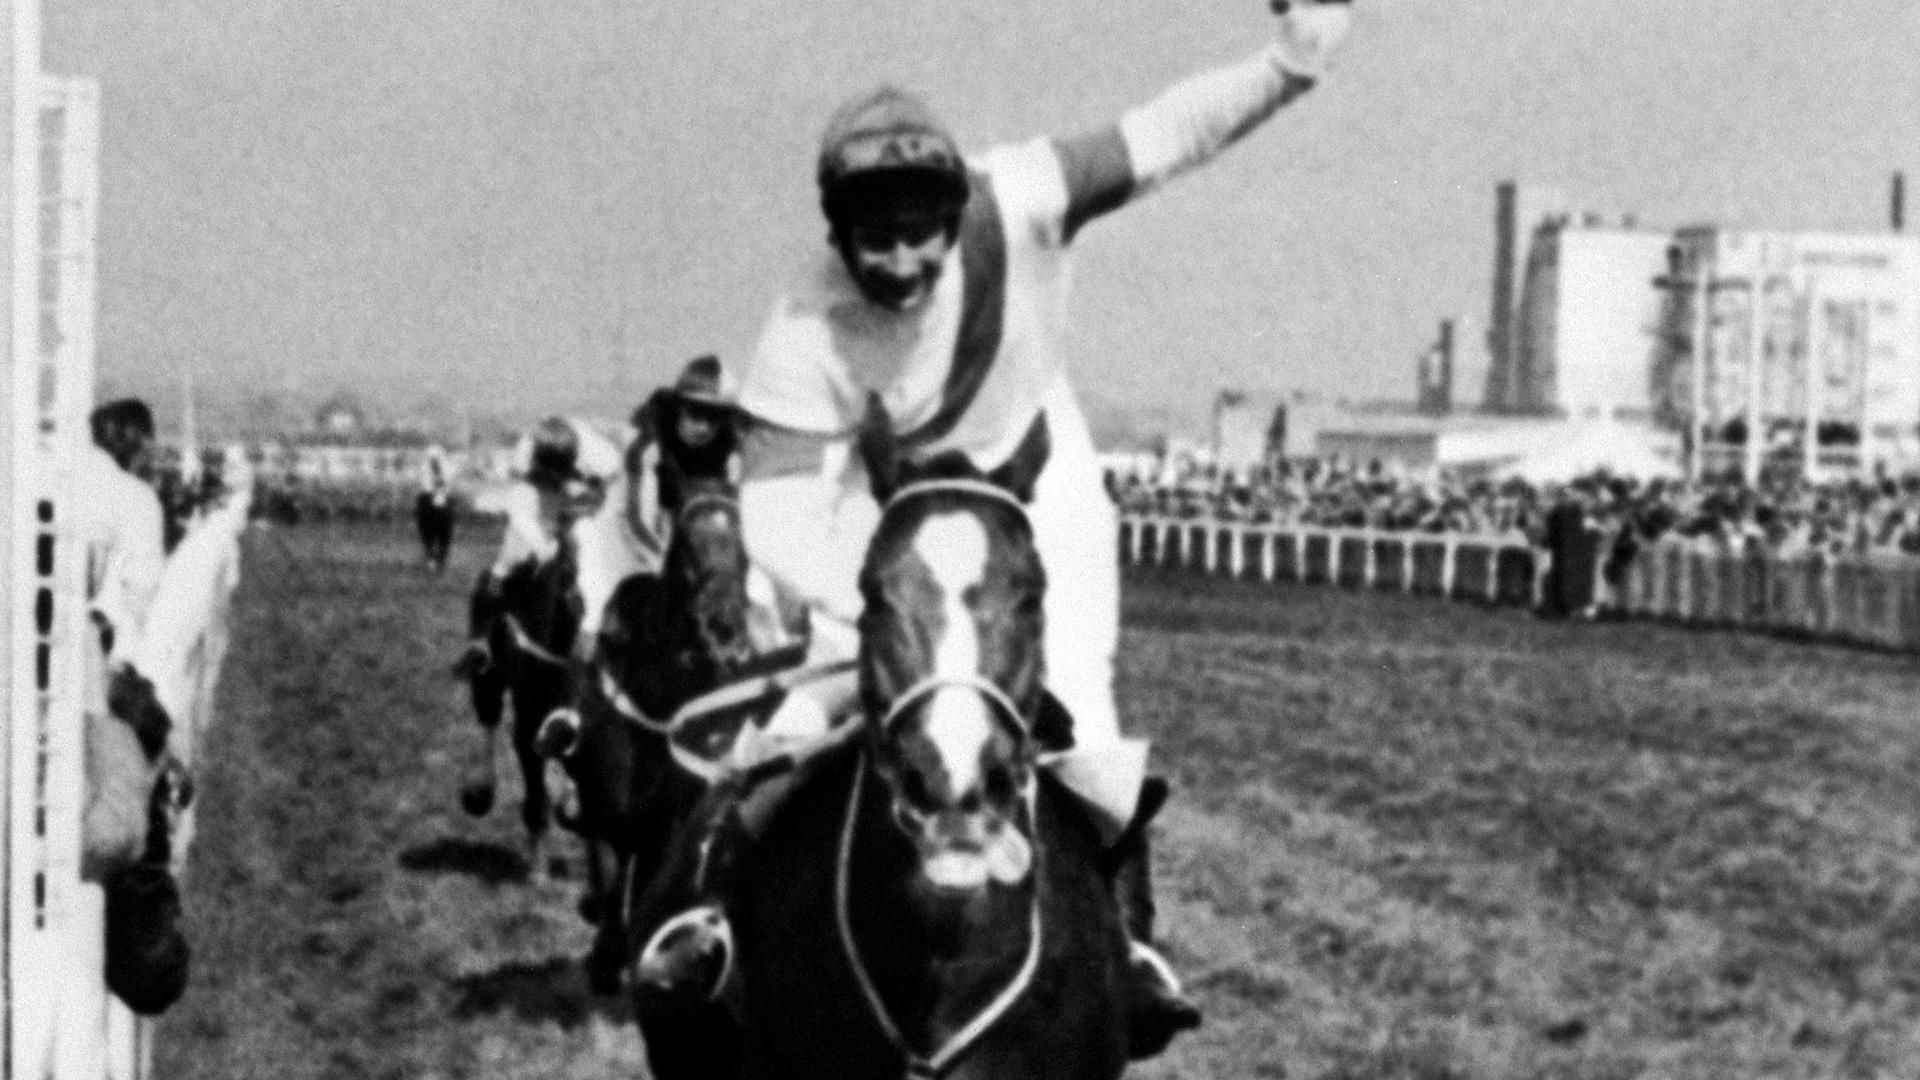 <p>                     The true story of Bob Champion, a British steeple chase jockey who, in the late 1970s, was diagnosed with cancer. Rather than succumb to the disease, however, Bob stages a miraculous recovery and goes on to win the 1981 Grand National steeplechase on the horse Aldaniti. It’s a real-life fairytale that’s well worth a watch. John Hunt plays the part of Bob, with Aldaniti played by the horse himself.                   </p>